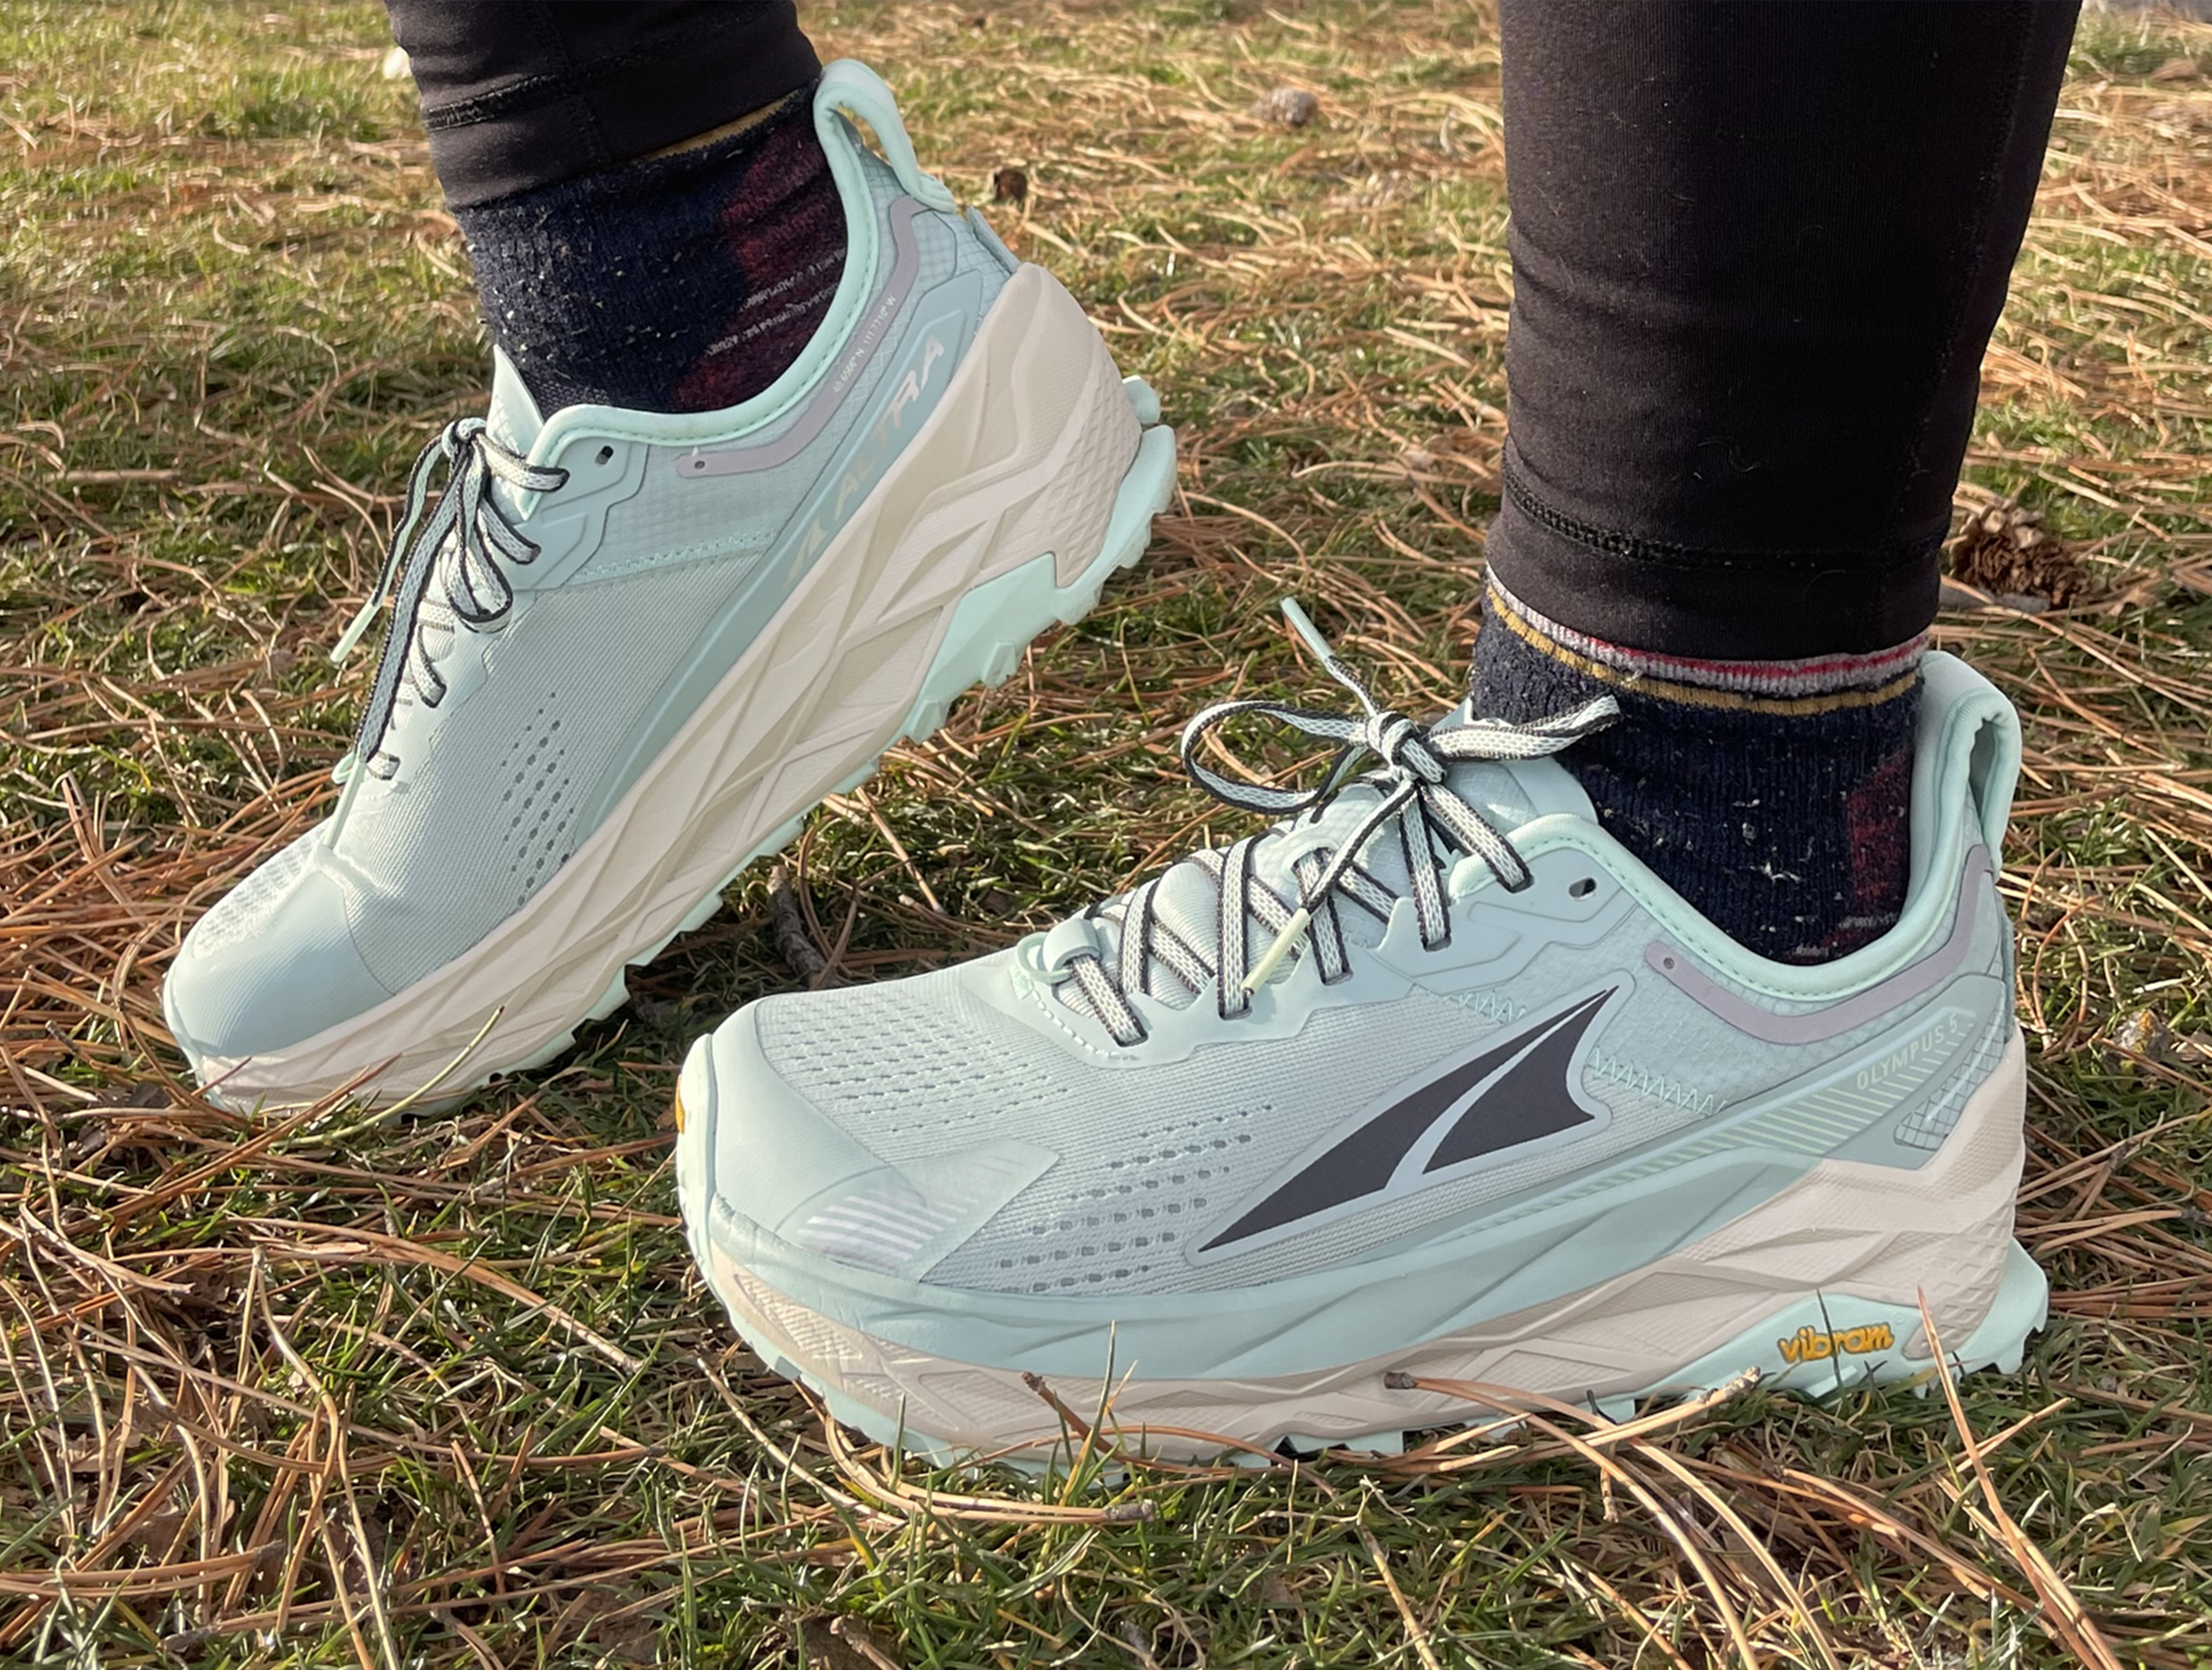 We tested the Altra Olympus.